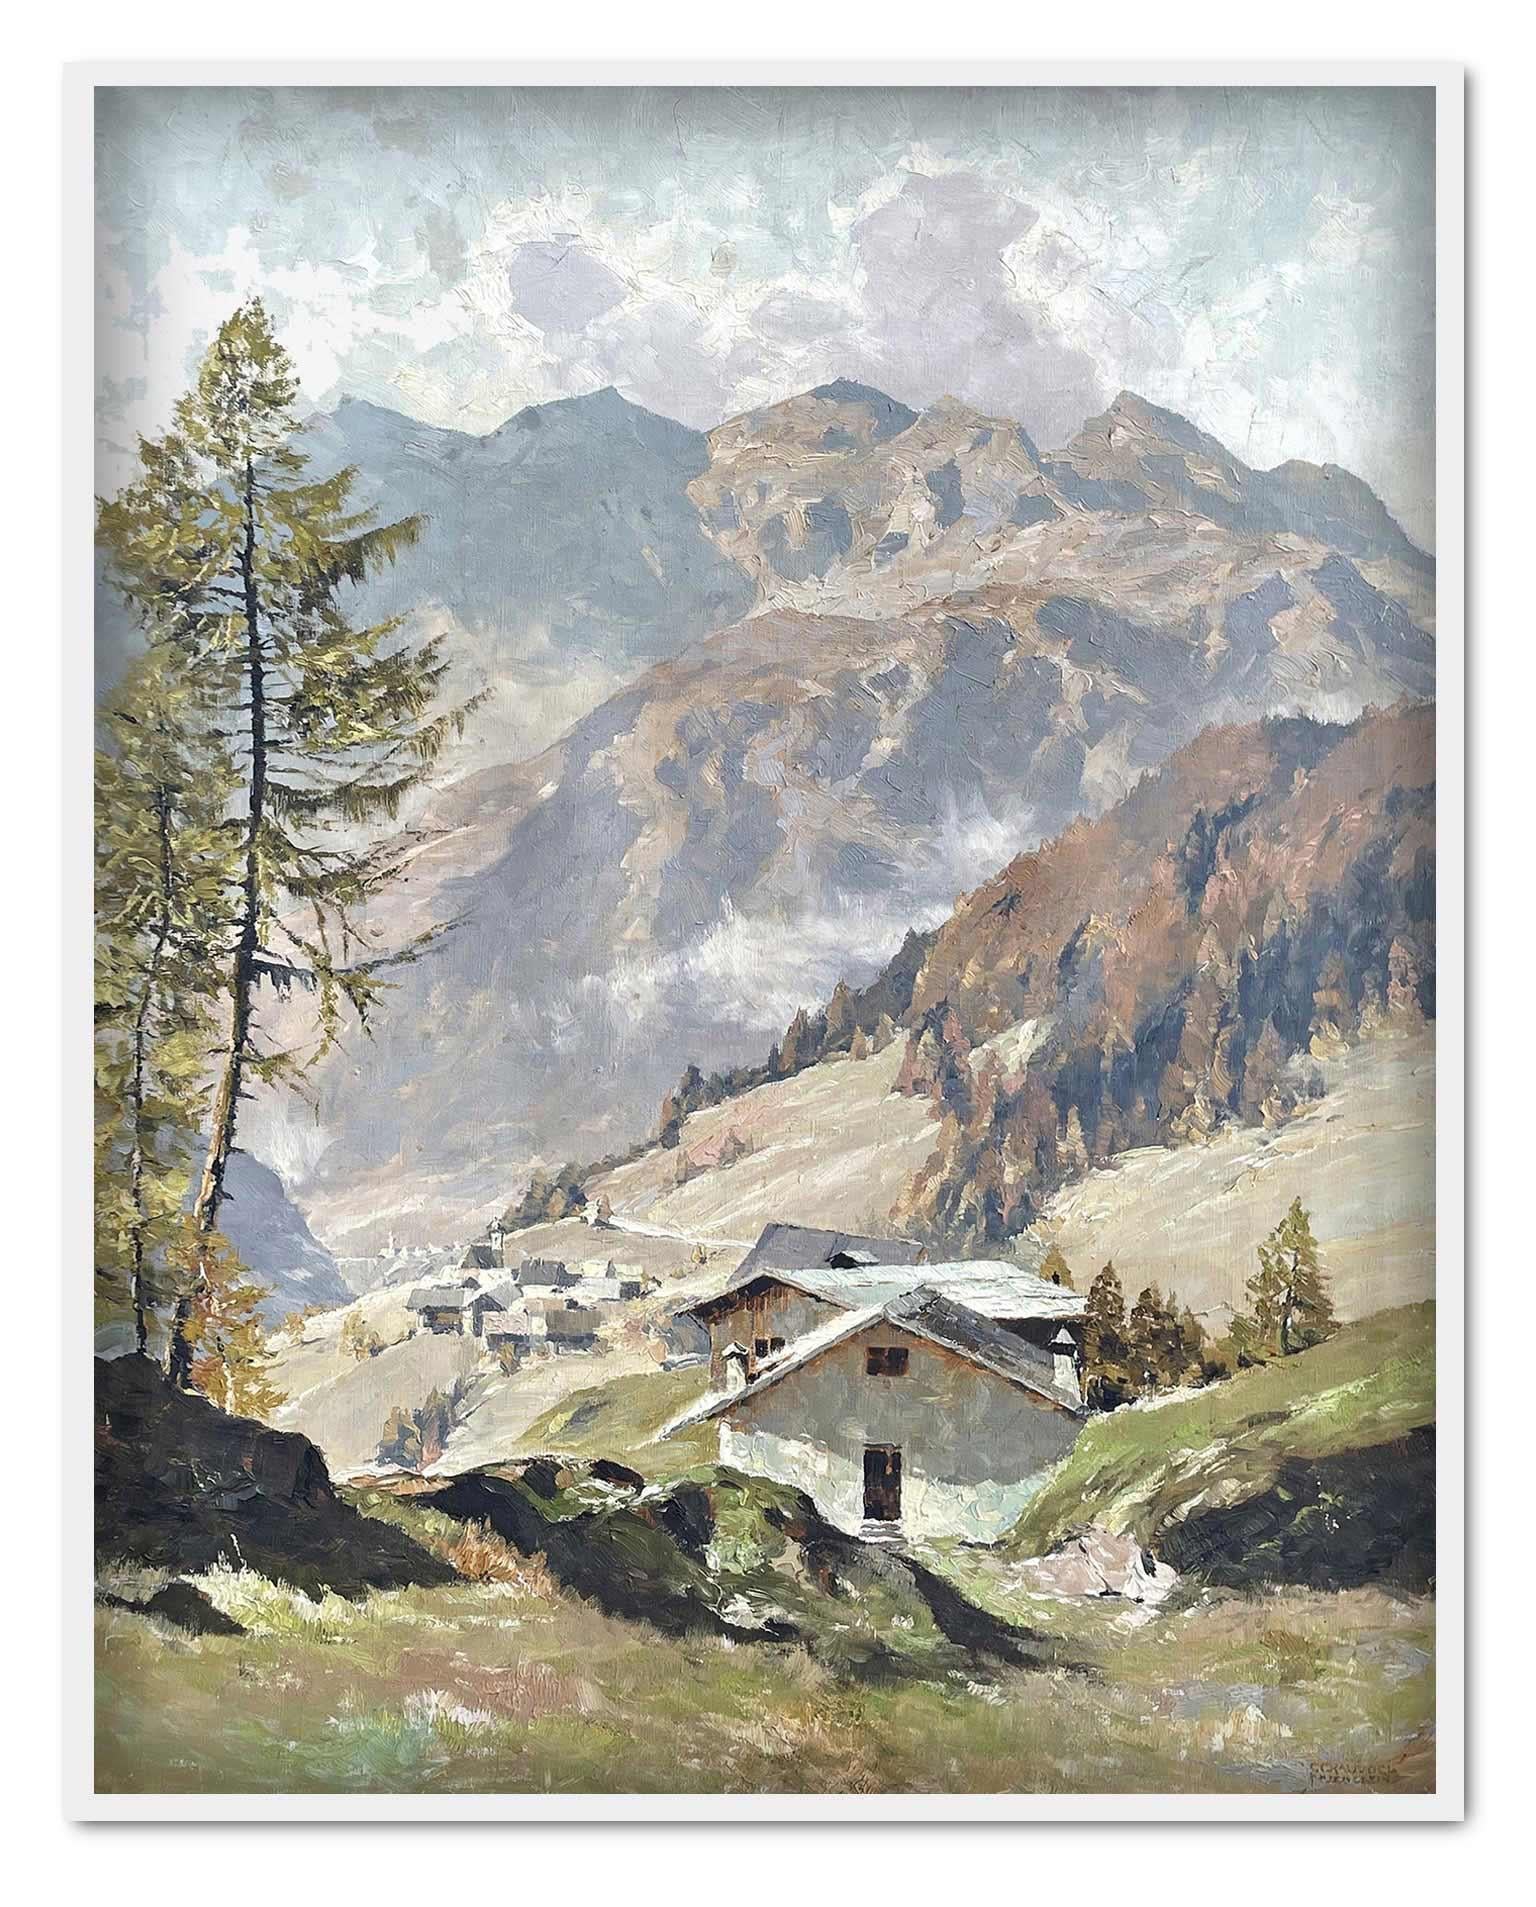 View of Val Gardena Italian Dolomites Oil on Canvas by Georg Grauvogl  10